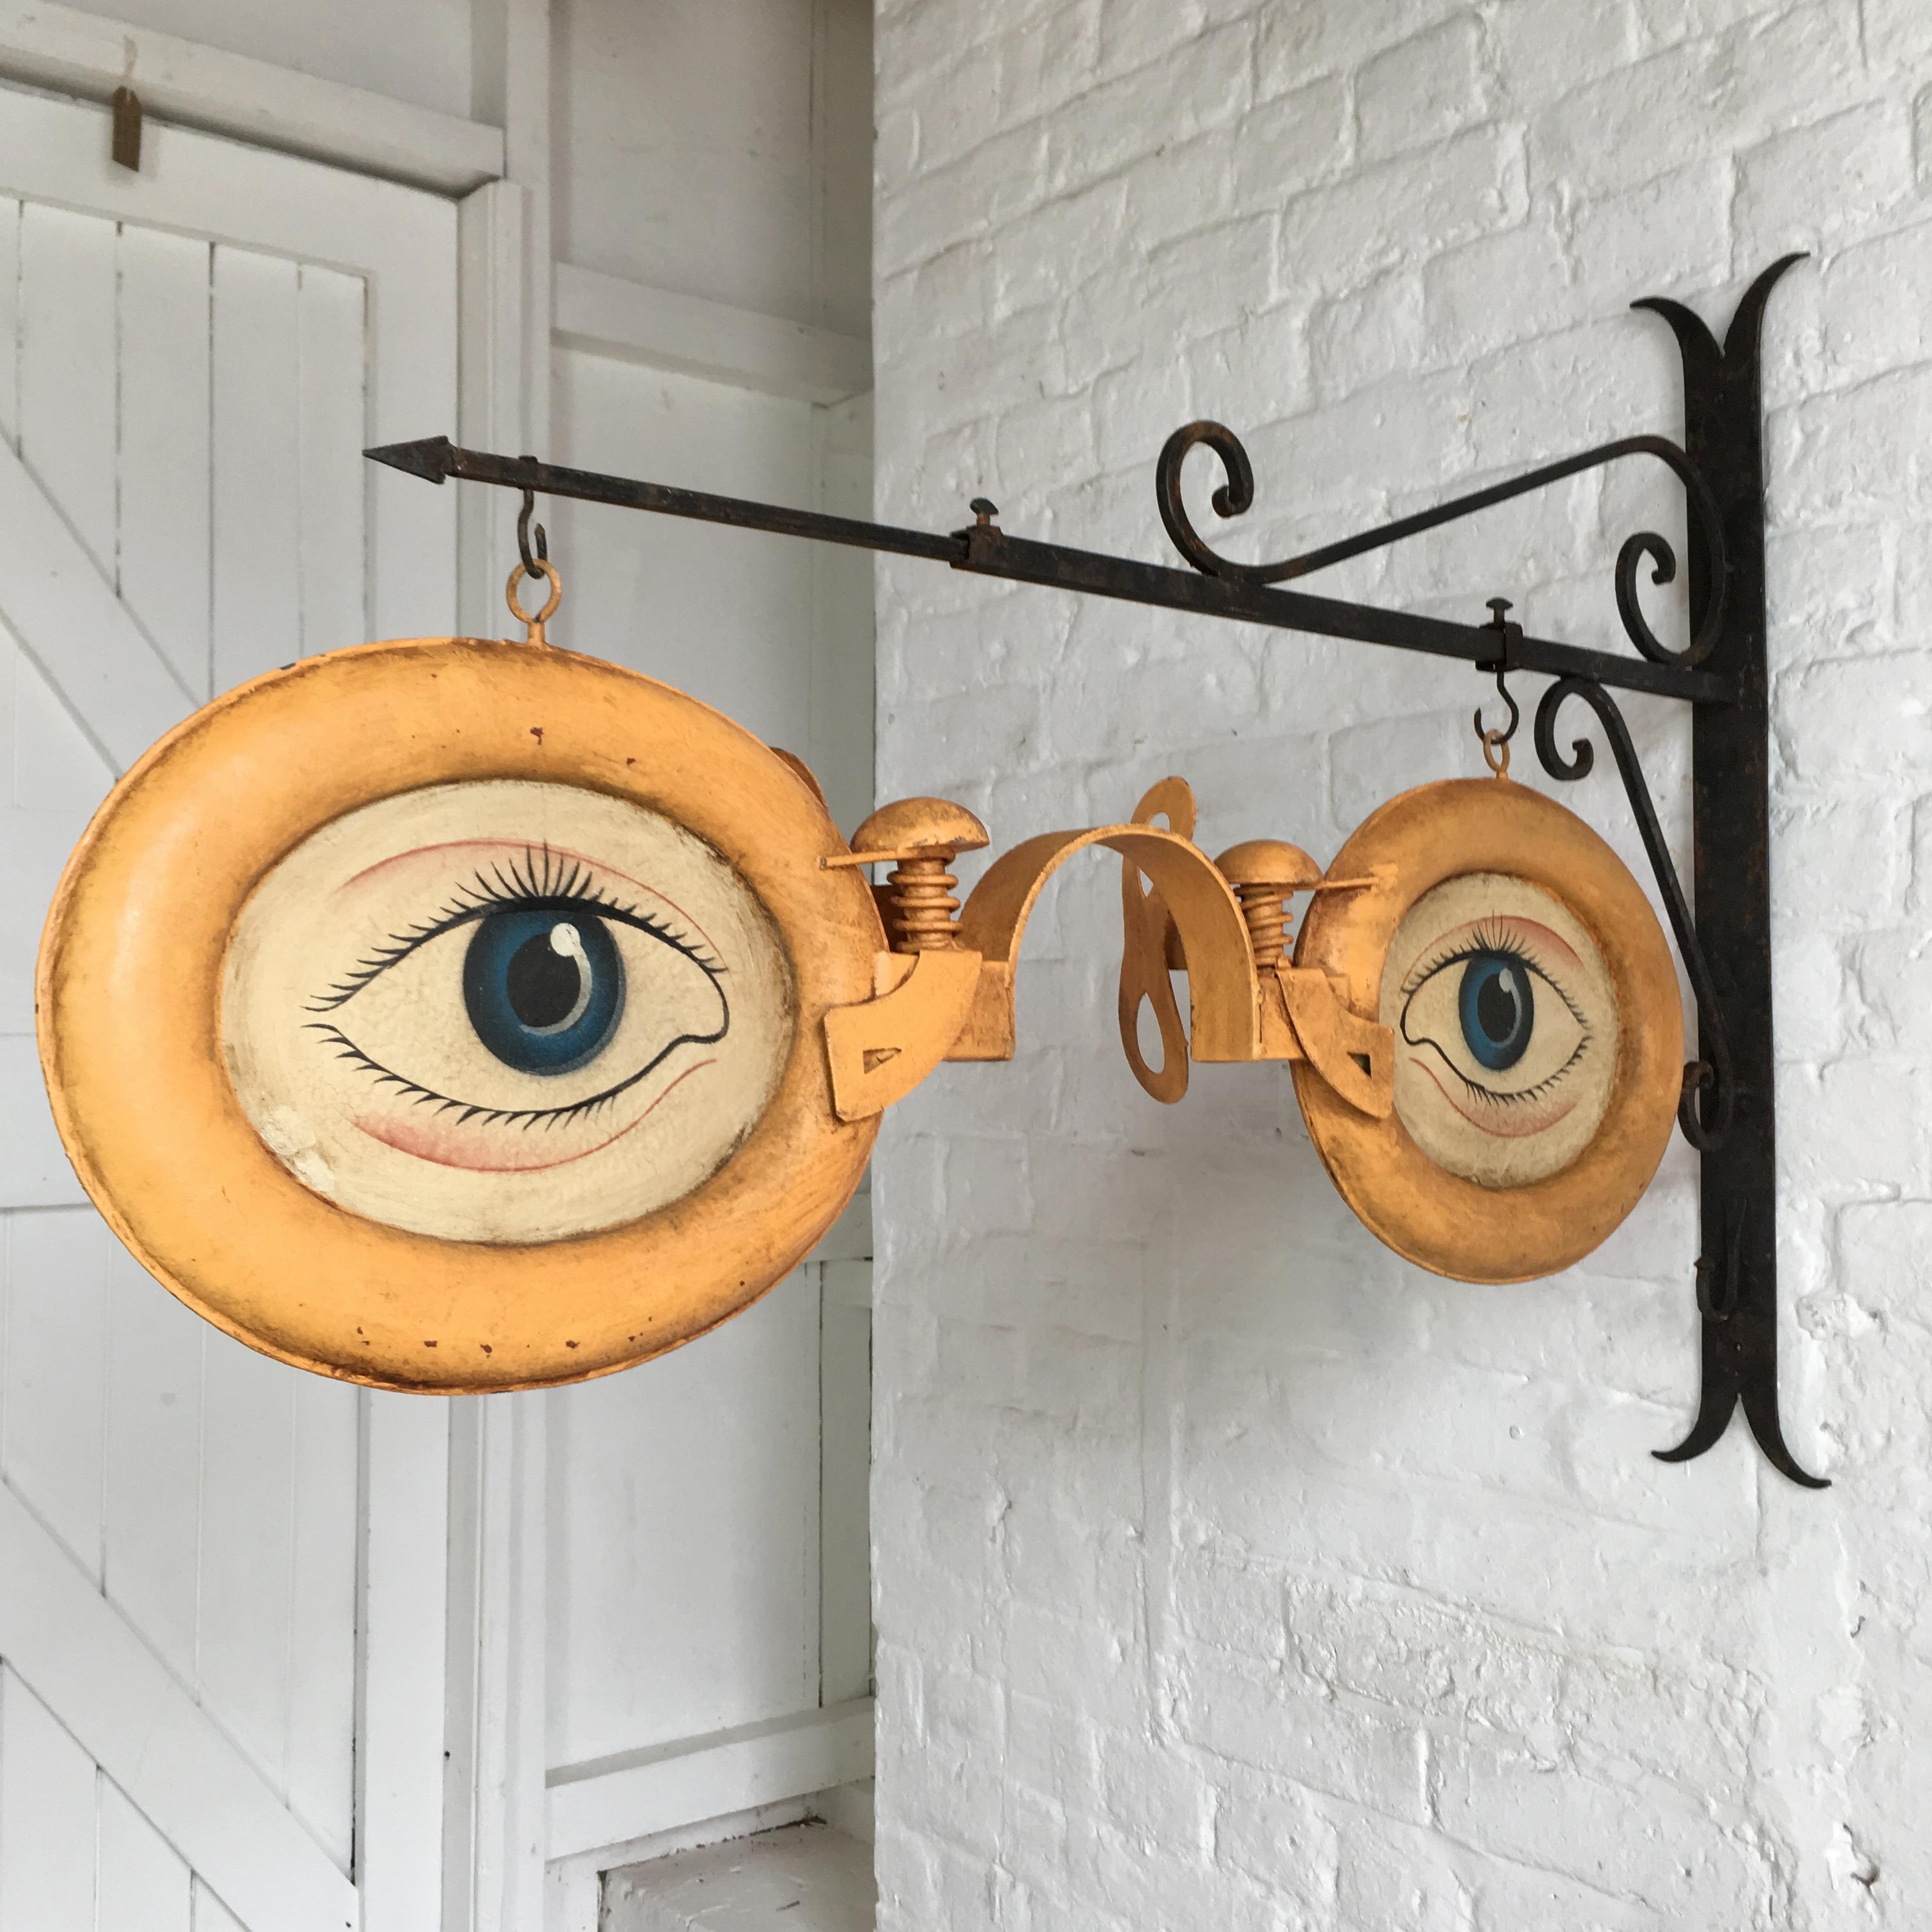 
Antique trade advertising sign for an opticians or optometrist
circa 1900-1930
France
Double sided large cast zinc glasses with hand painted eyes, same both sides
The eyes hang on the original adjustable iron wall bracket
Rare and collectable